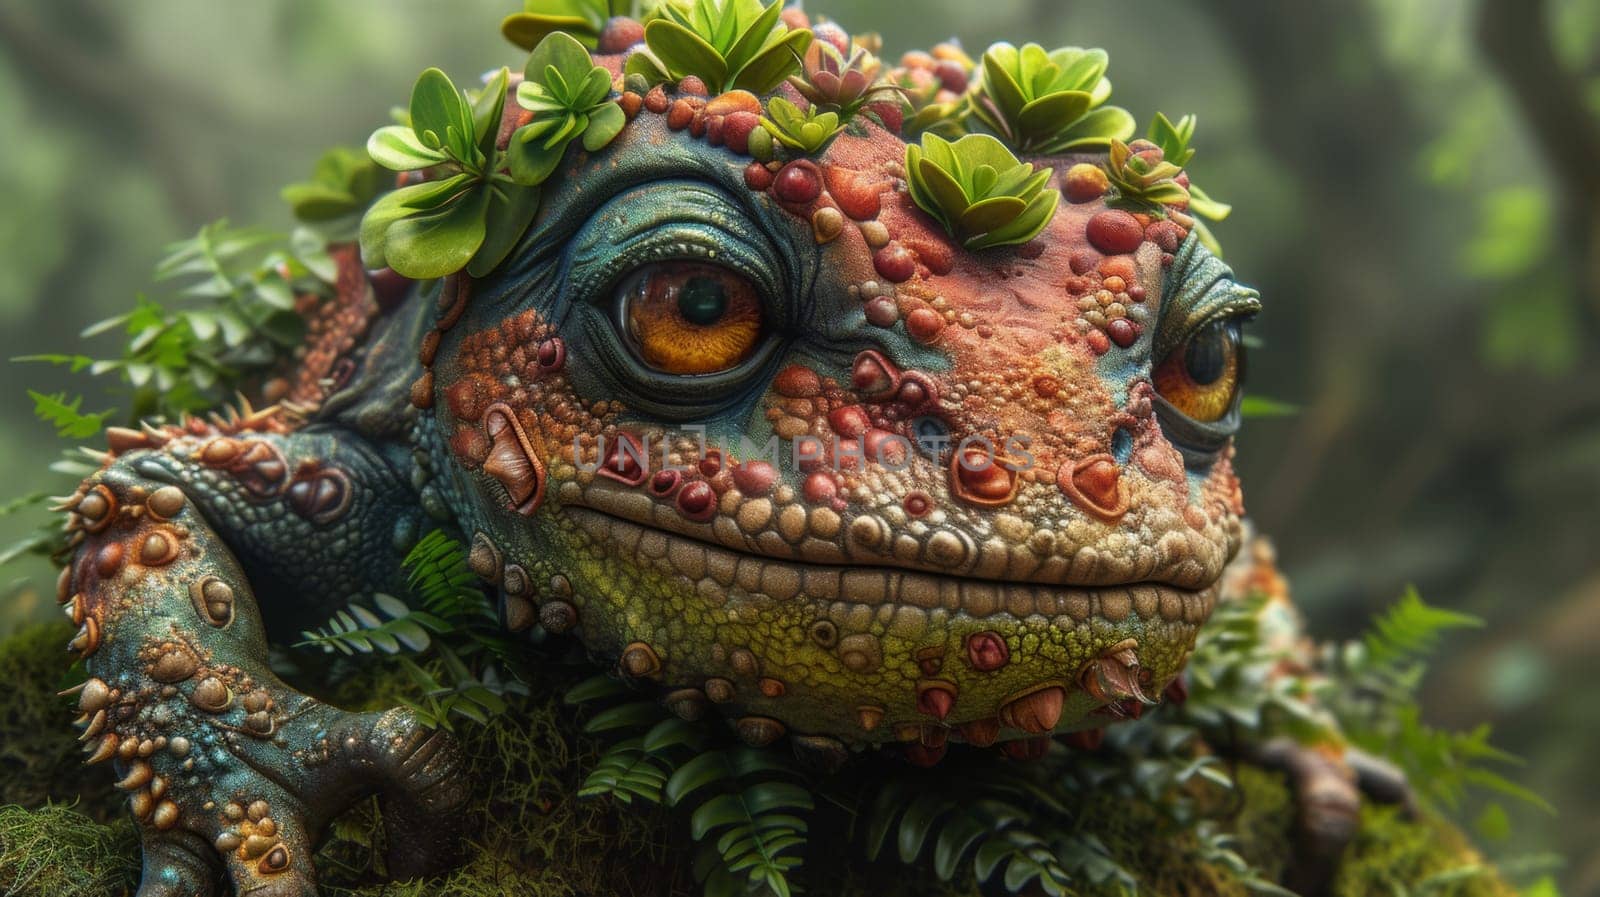 A close up of a lizard with plants on its head